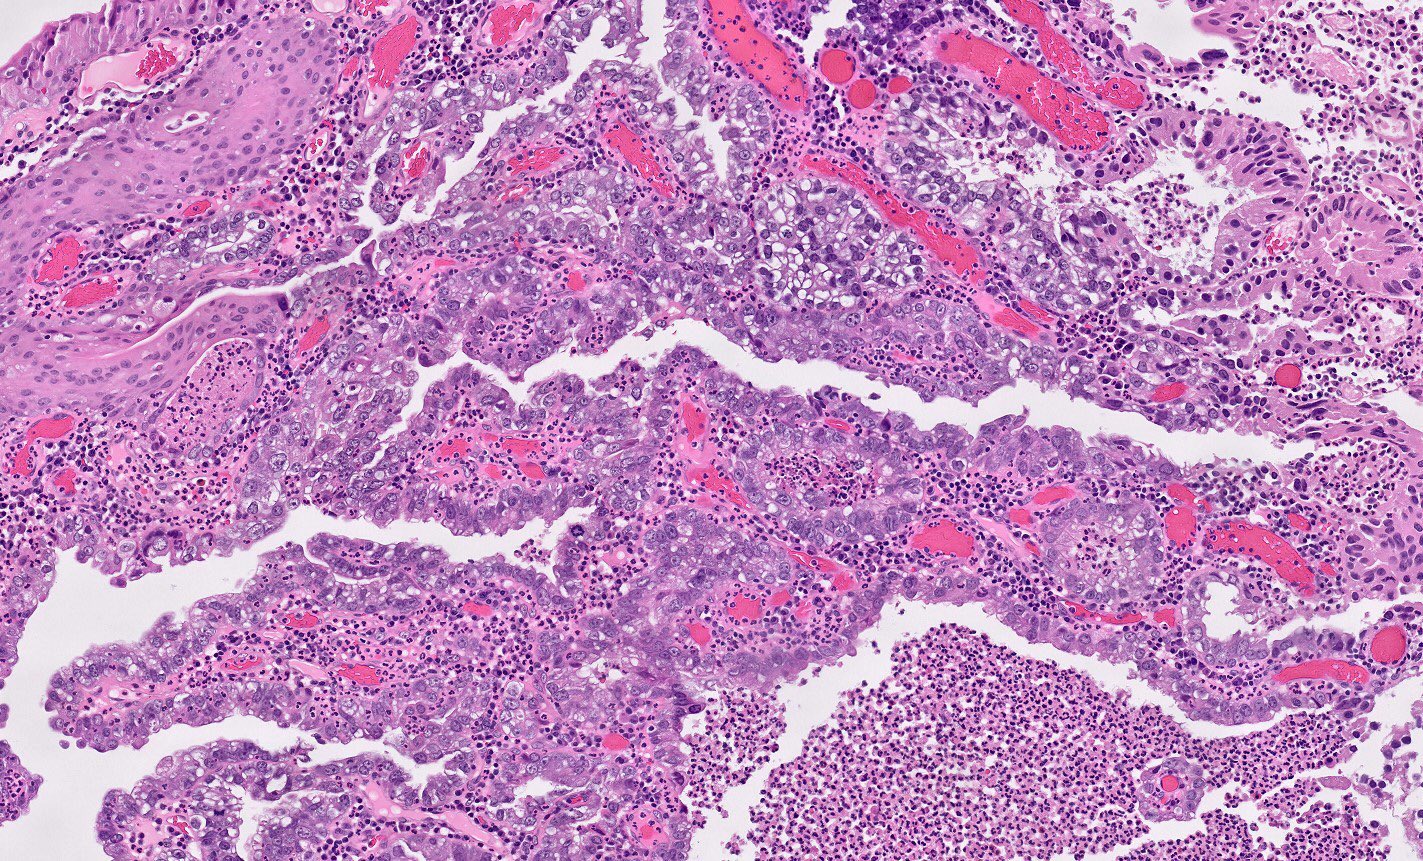 Clear cell (adeno)carcinoma